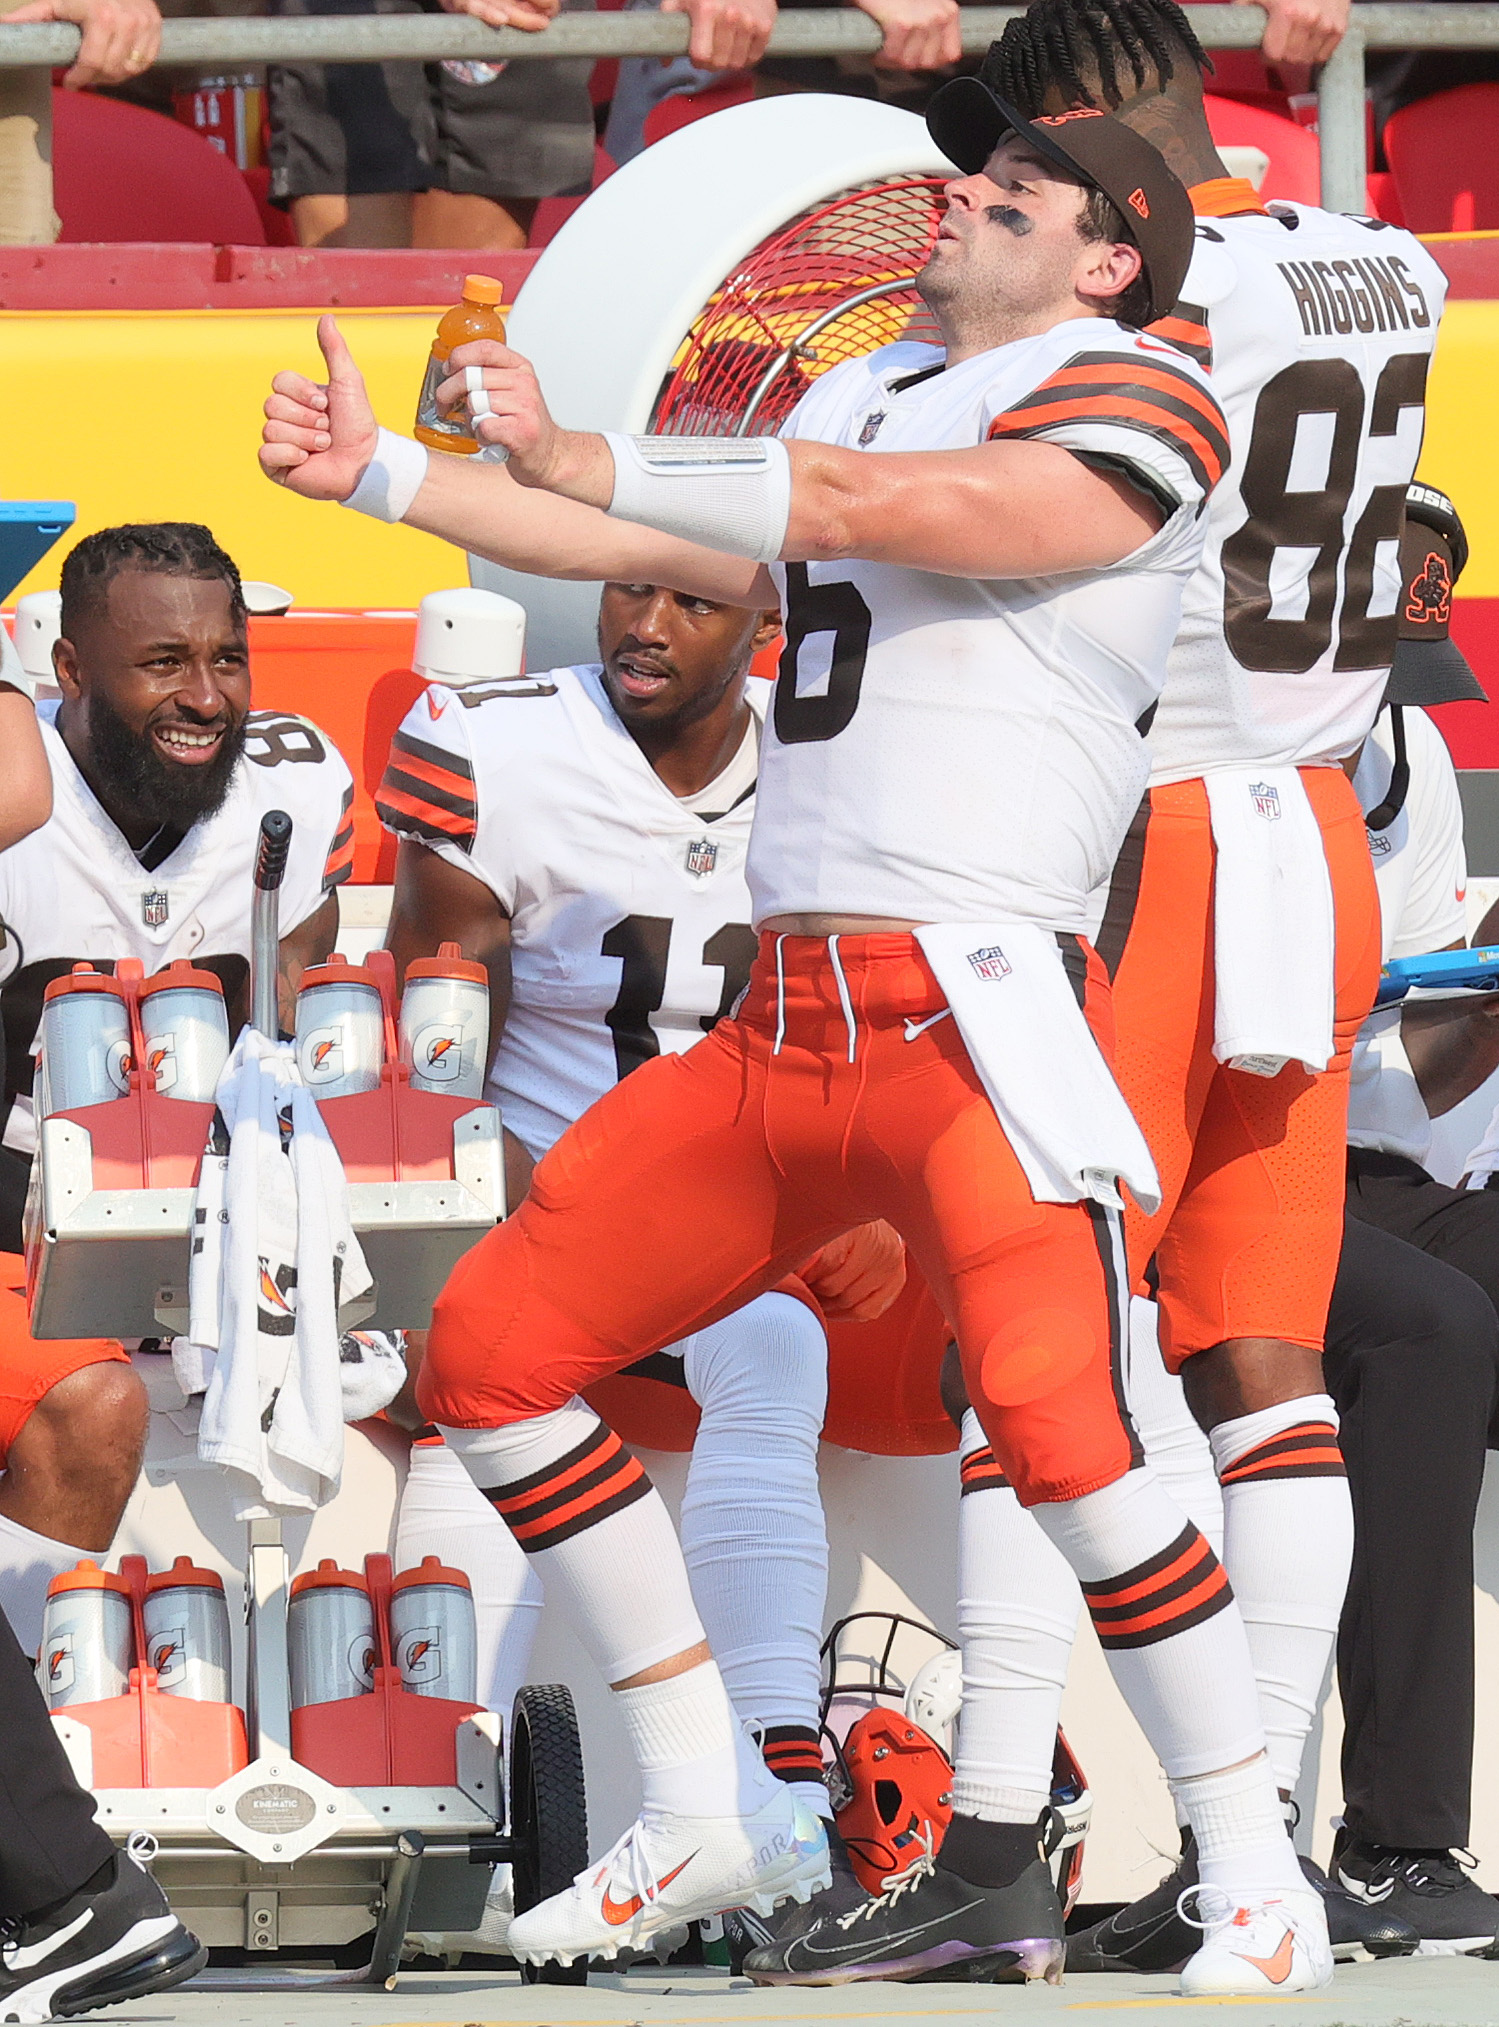 Replay: Cleveland Browns lose 33-29 to Kansas City Chiefs